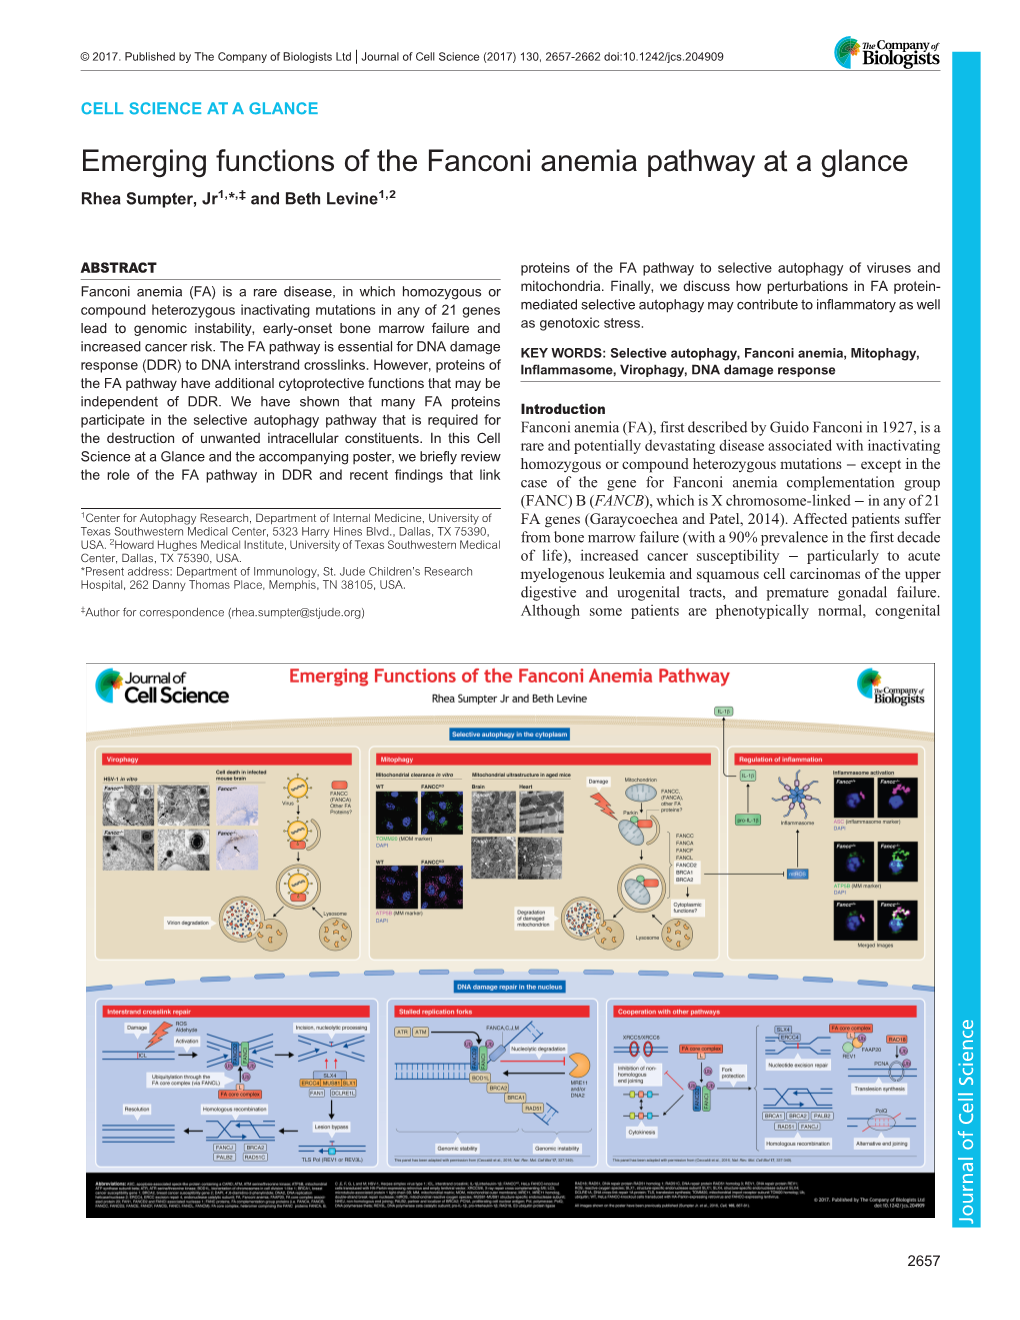 Emerging Functions of the Fanconi Anemia Pathway at a Glance Rhea Sumpter, Jr1,*,‡ and Beth Levine1,2